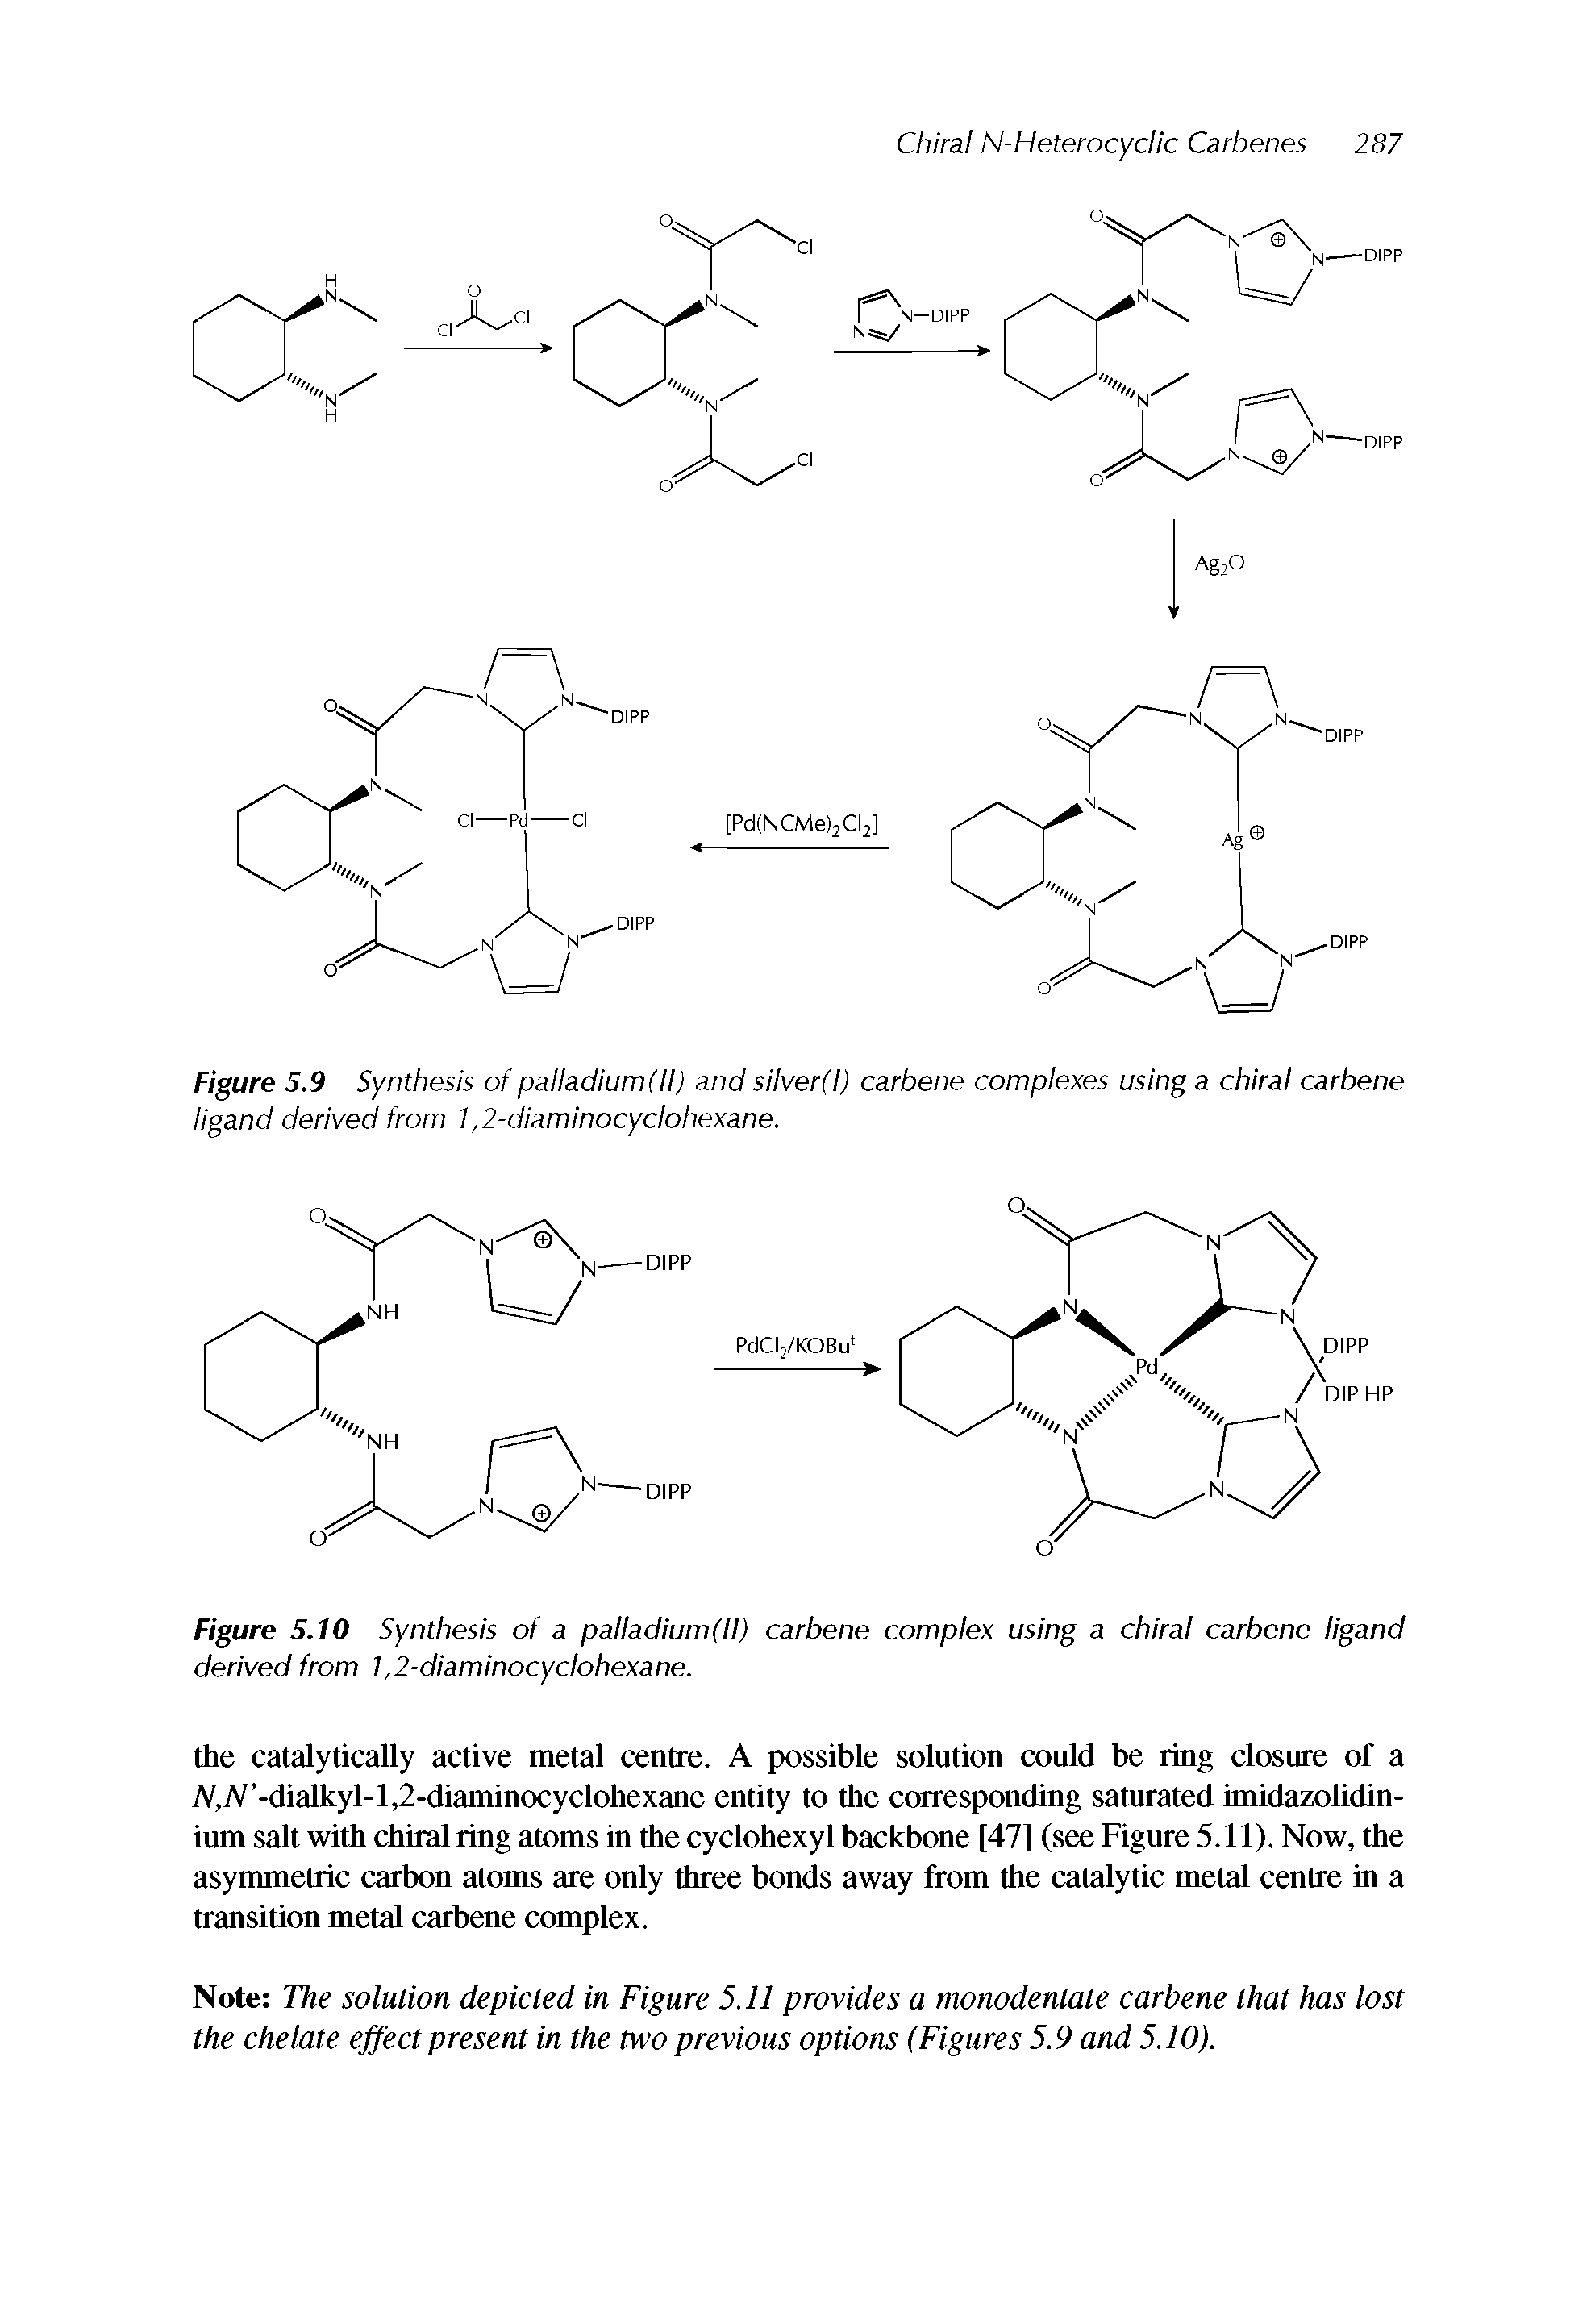 Figure 5.9 Synthesis of palladium(ll) and silver(l) carbene complexes using a chiral carbene ligand derived from 1,2-diaminocyclohexane.